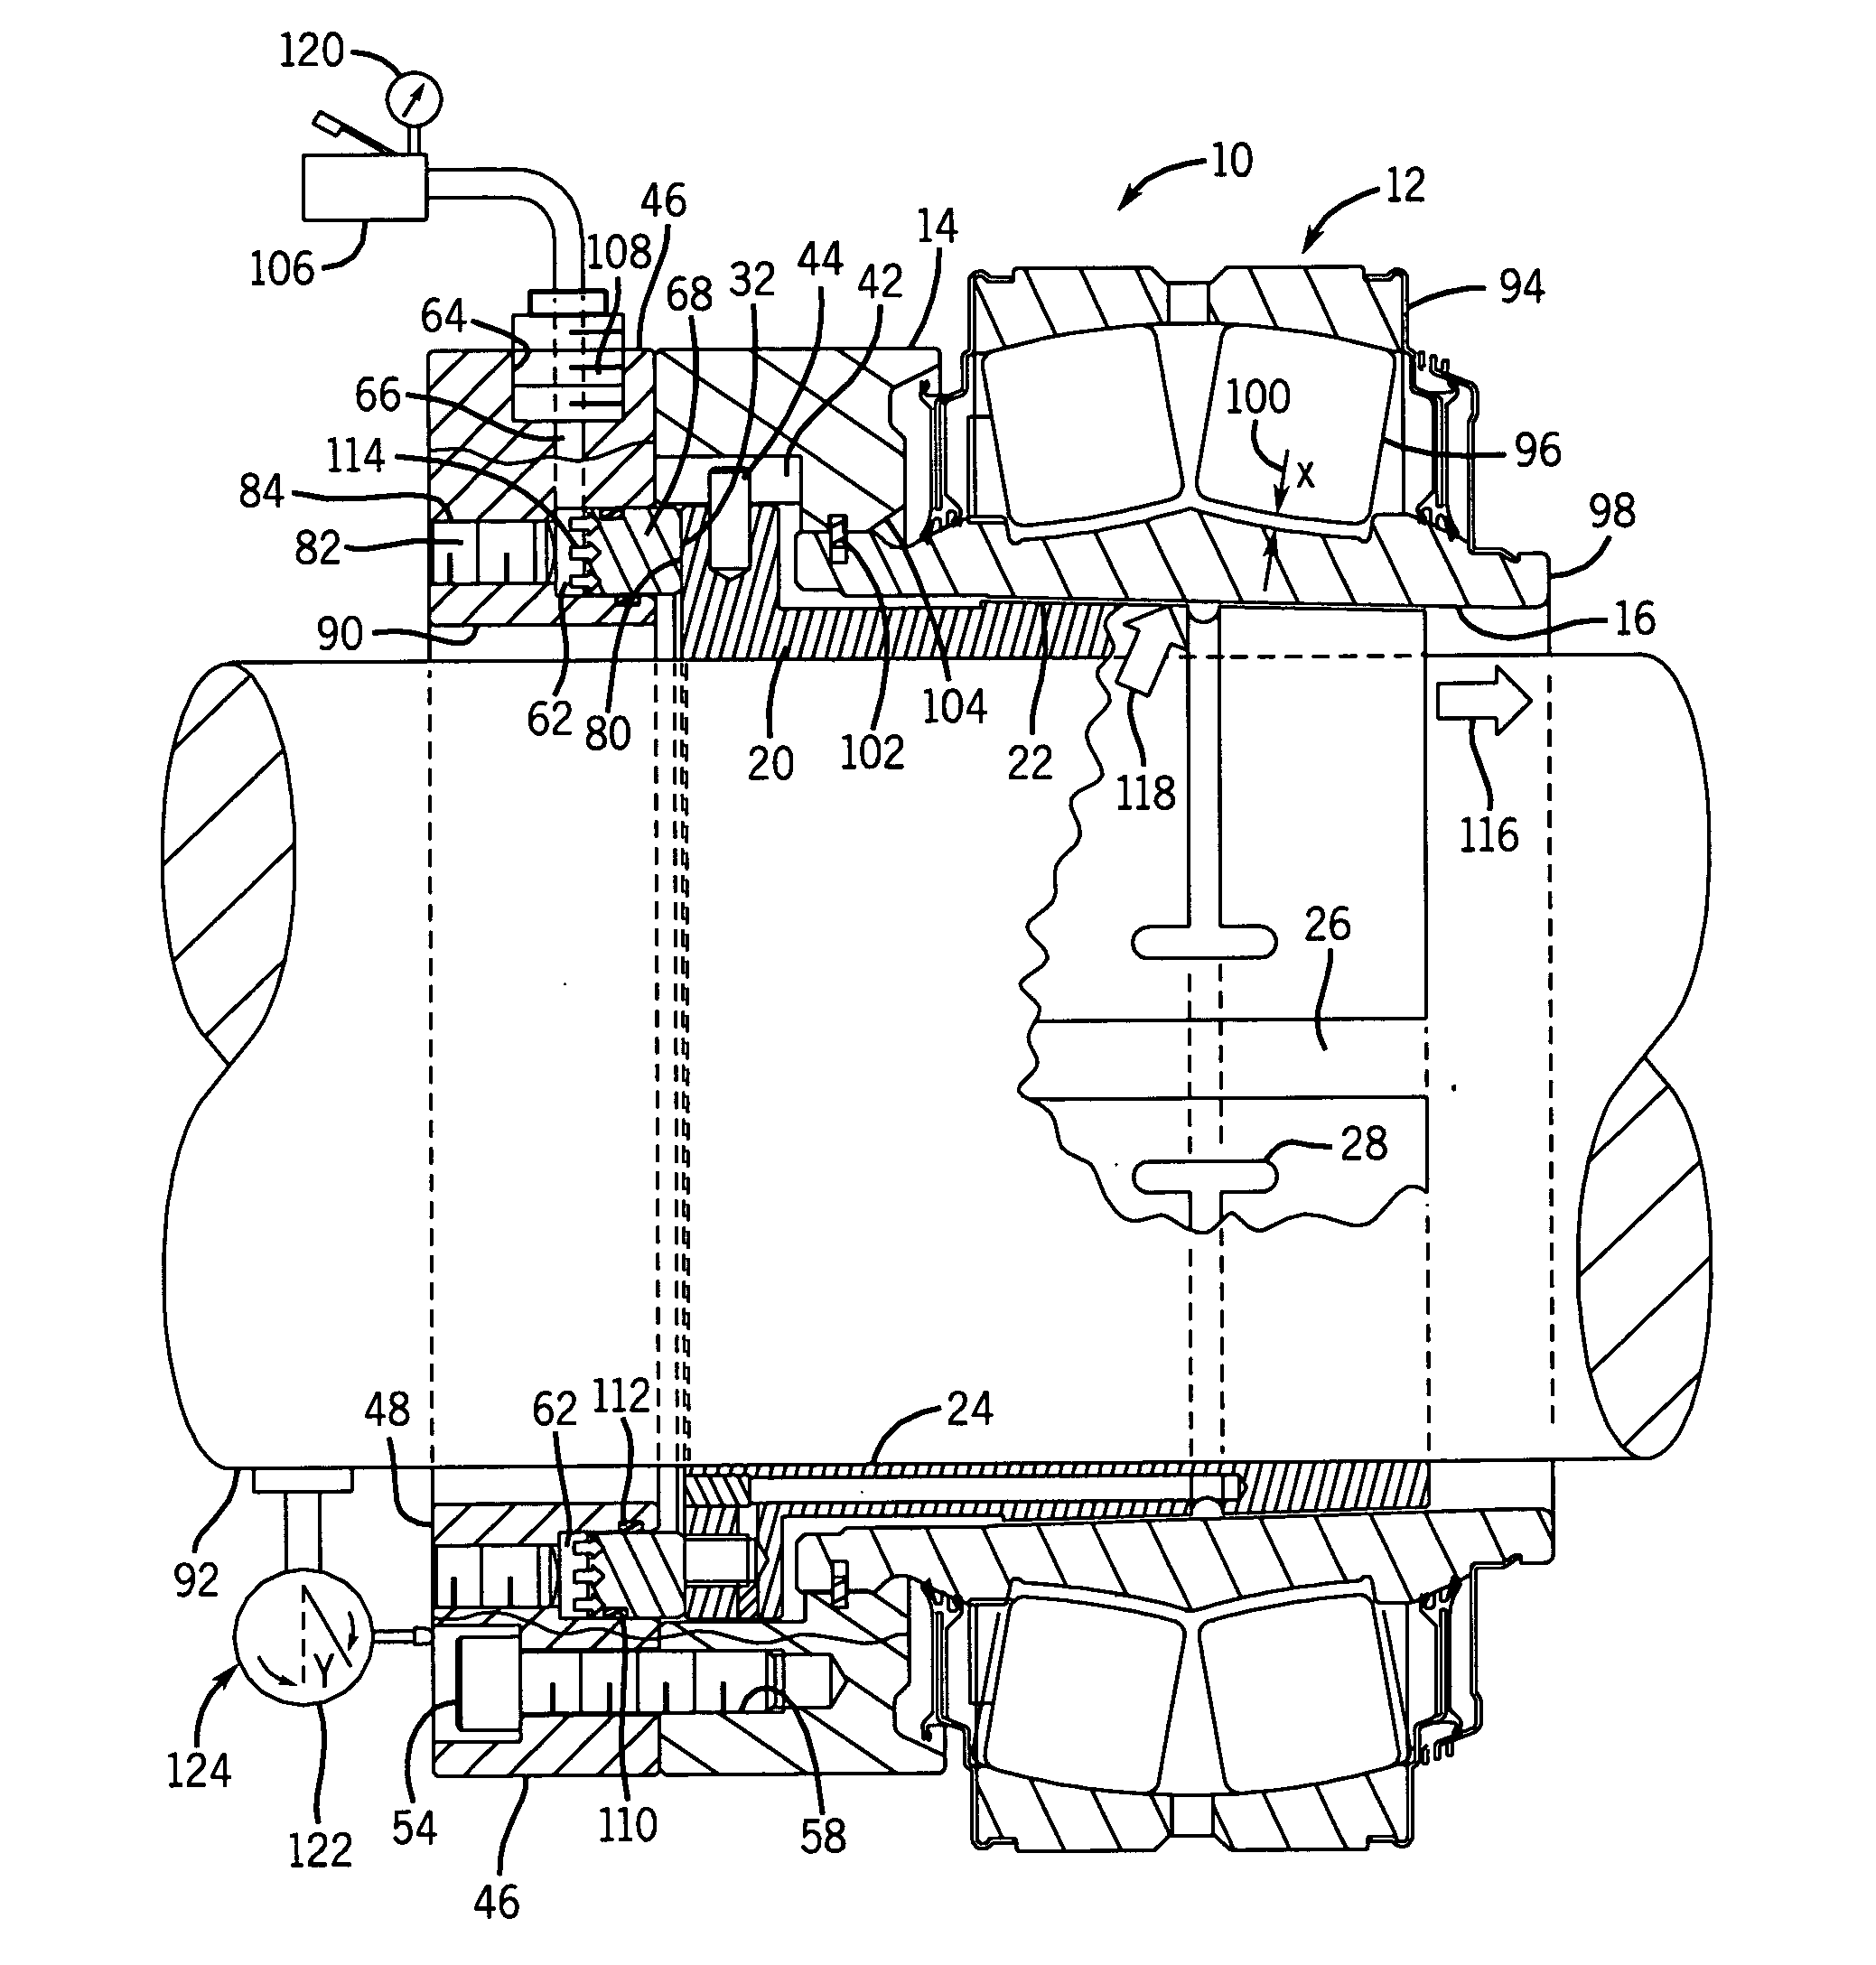 Hydraulically positioned shaft bearing attachment system and method